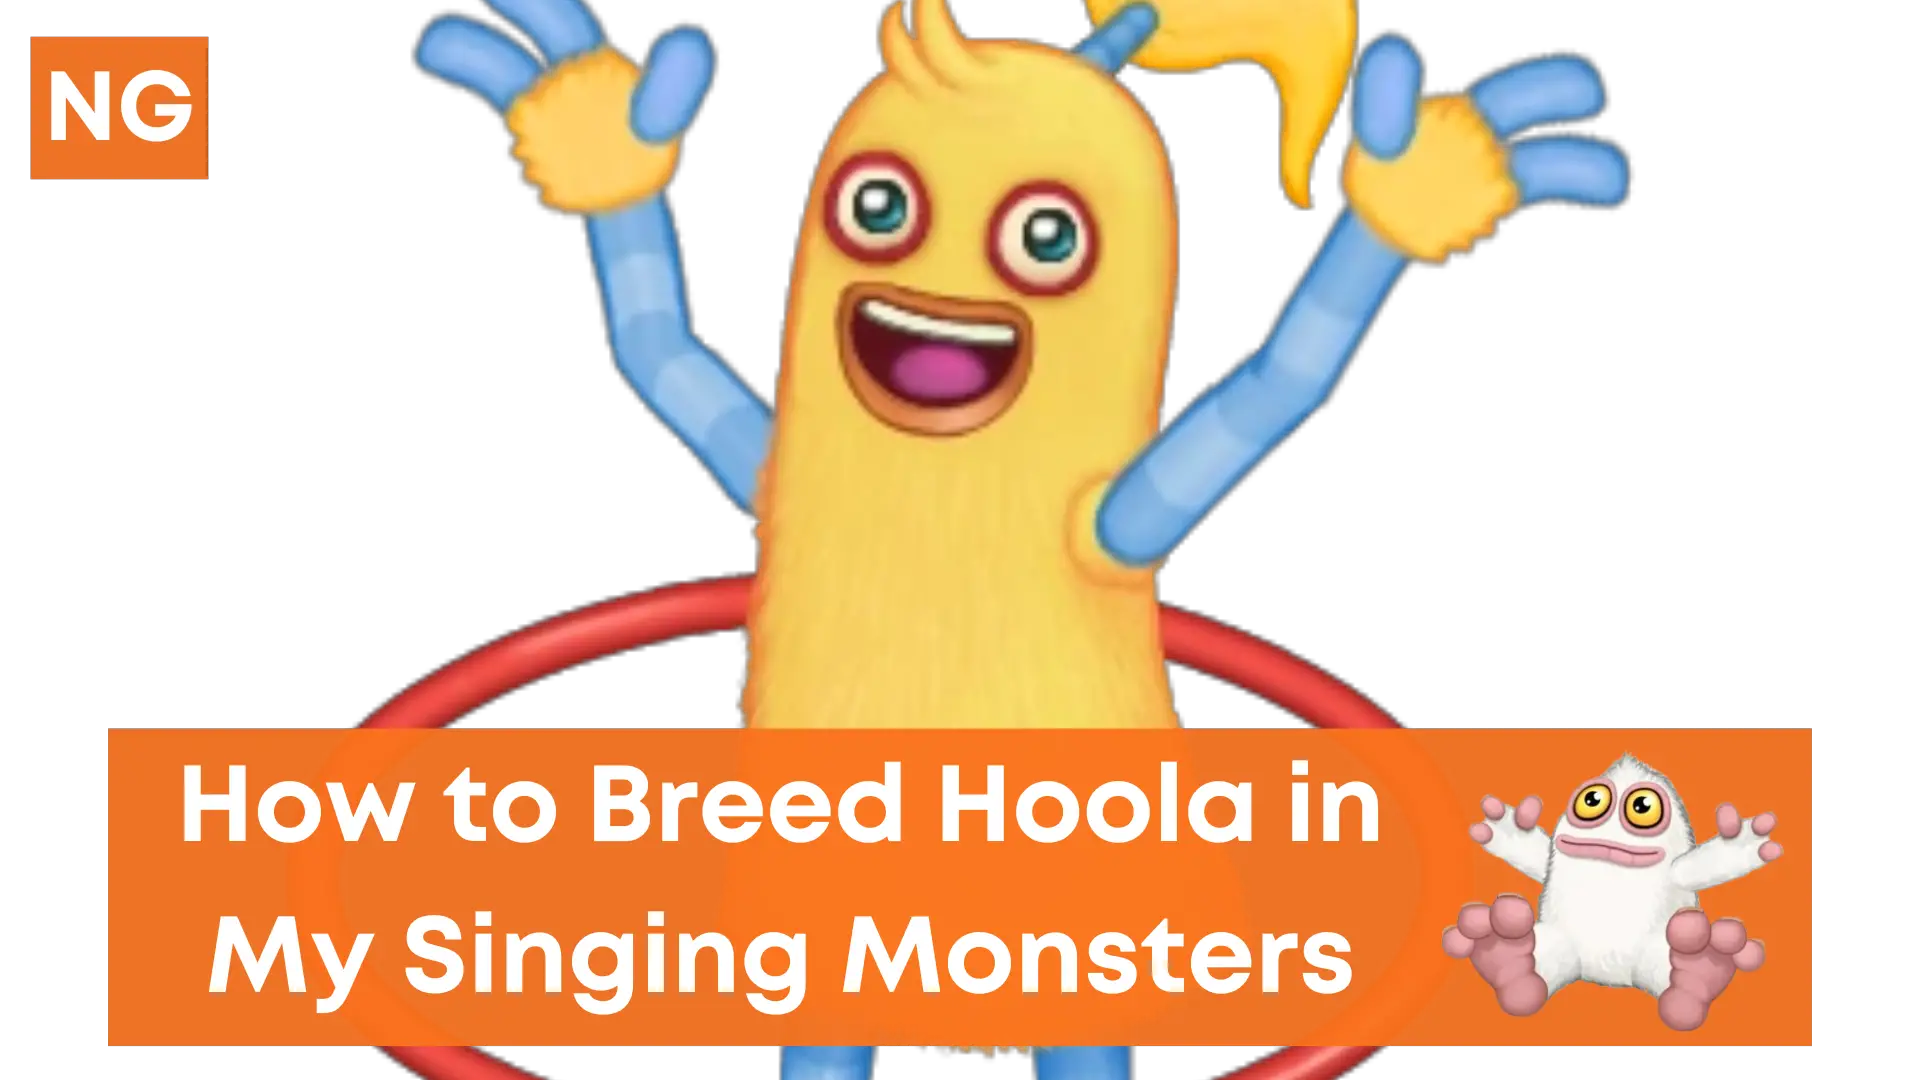 How To Breed A Hoola In My Singing Monsters